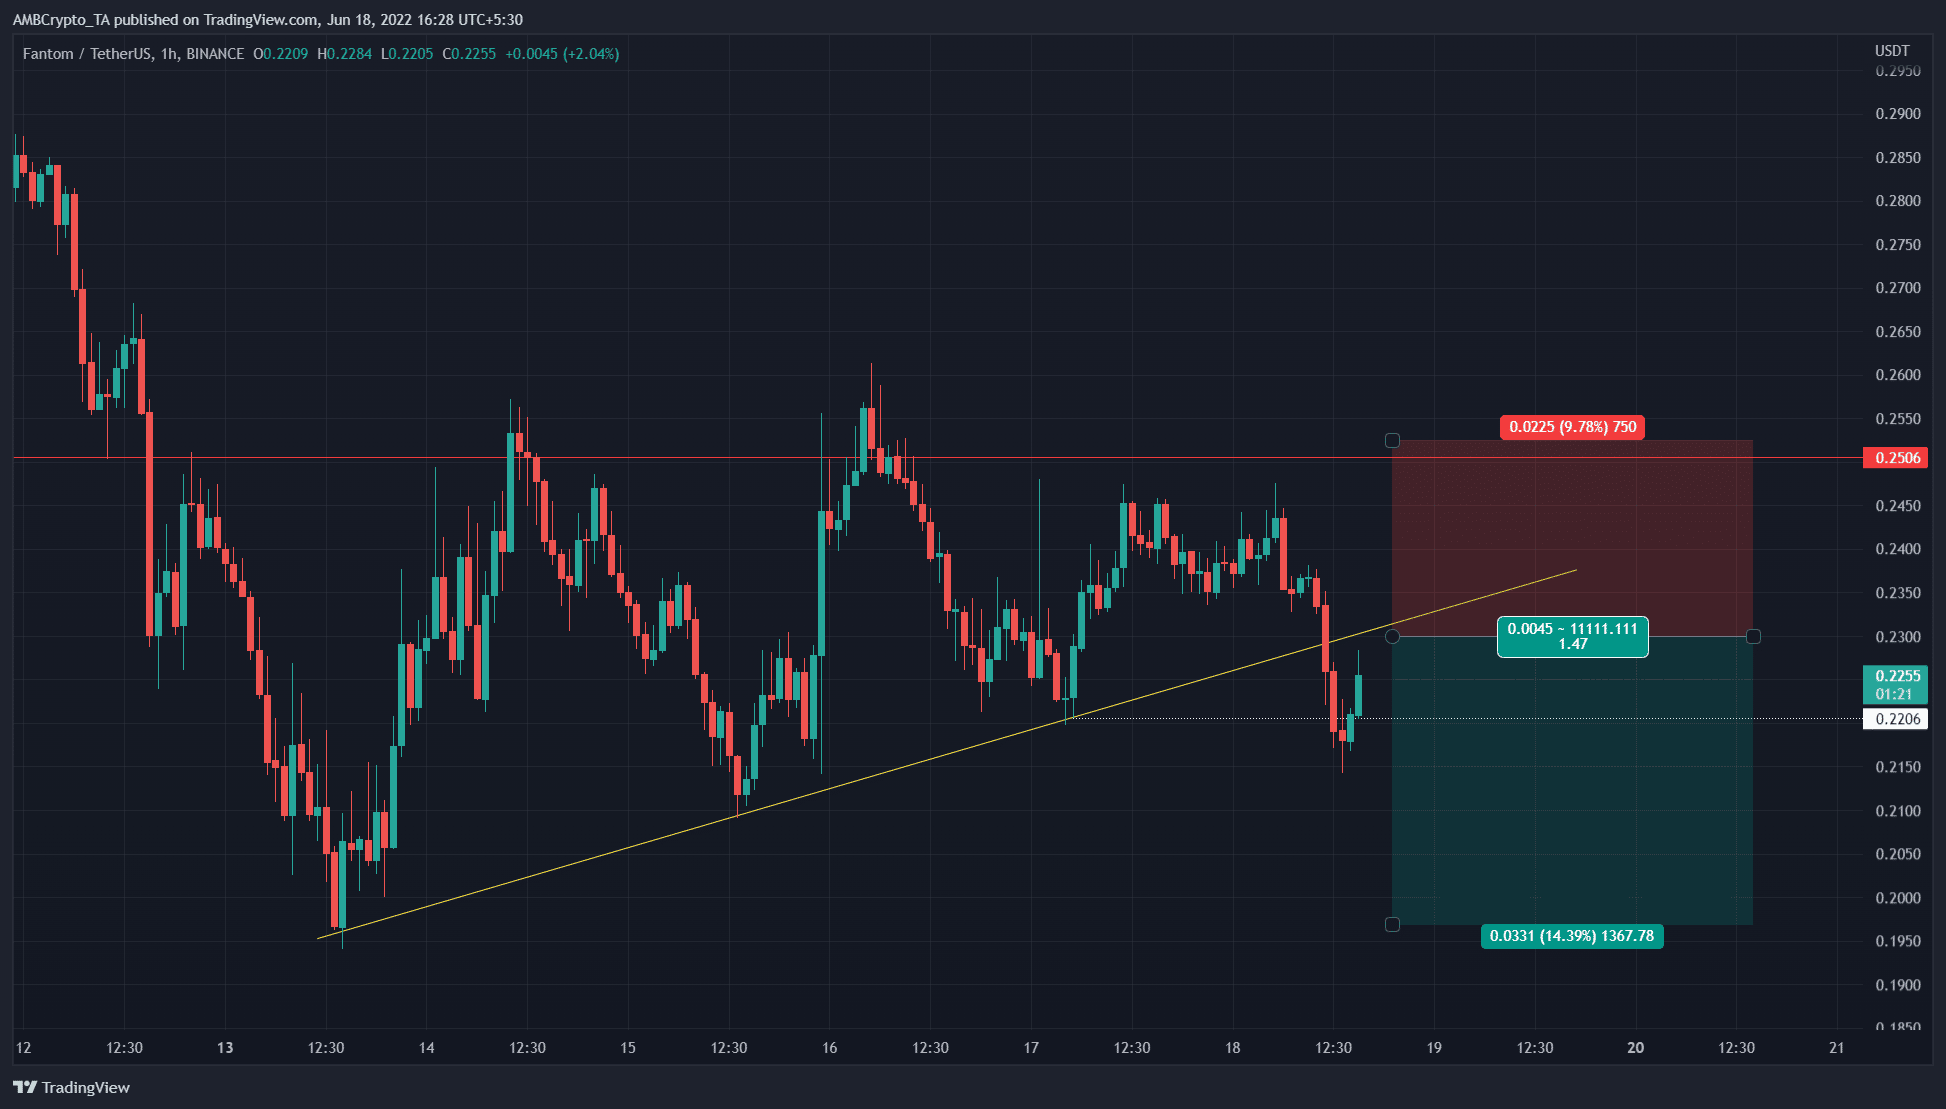 Fantom breaks trendline support, could this be a shorting opportunity?